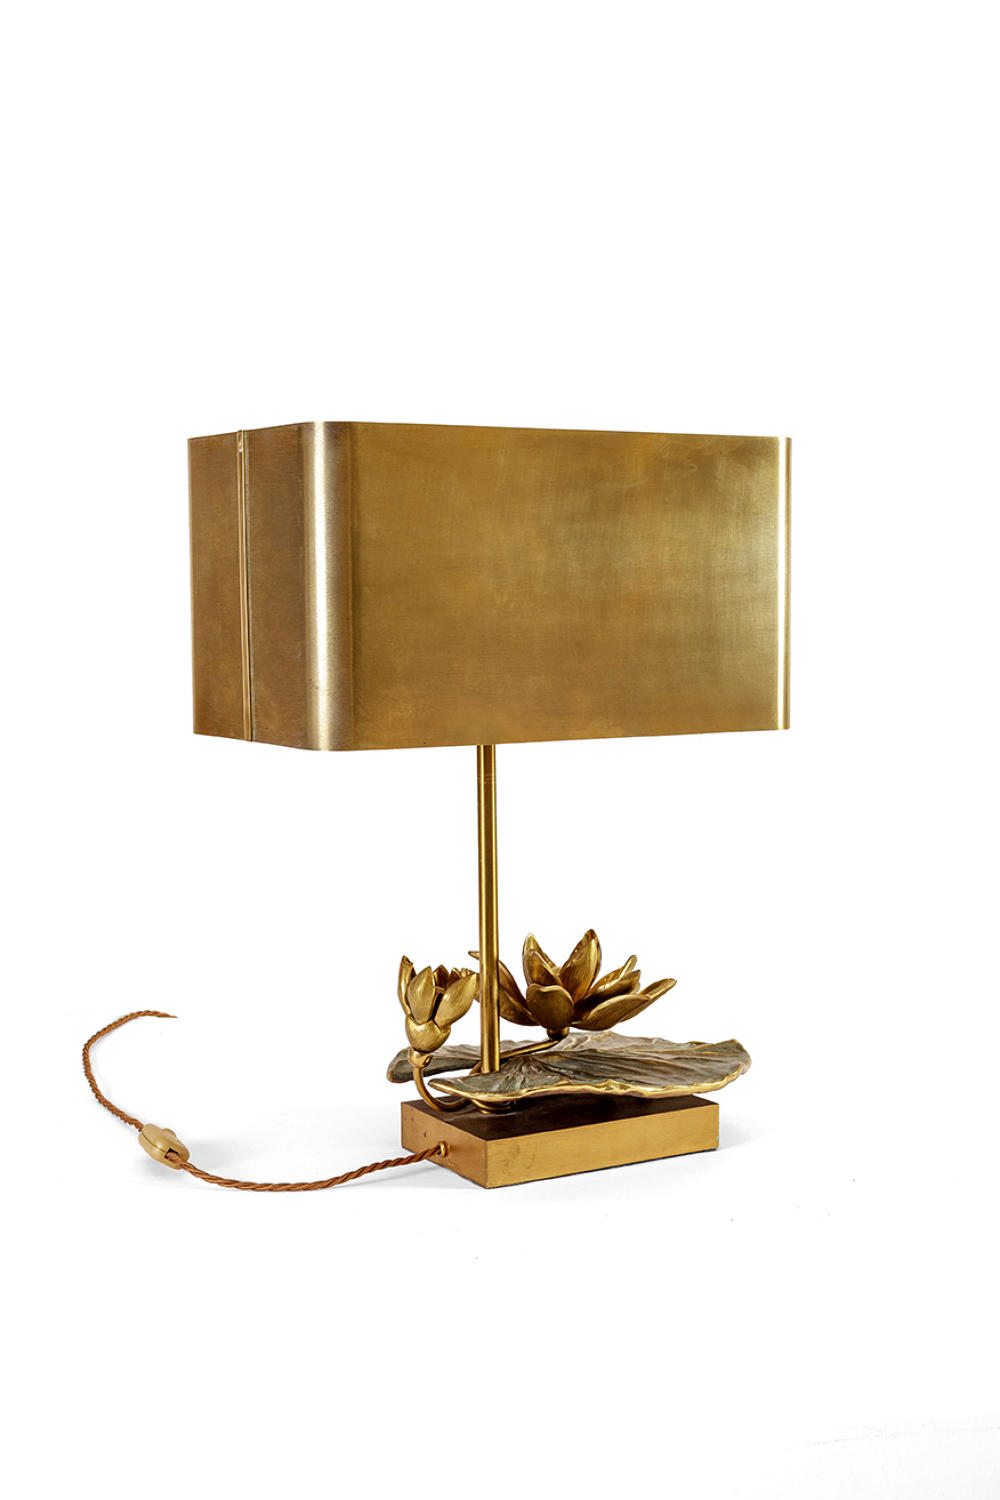 Maison Charles Lily lamp